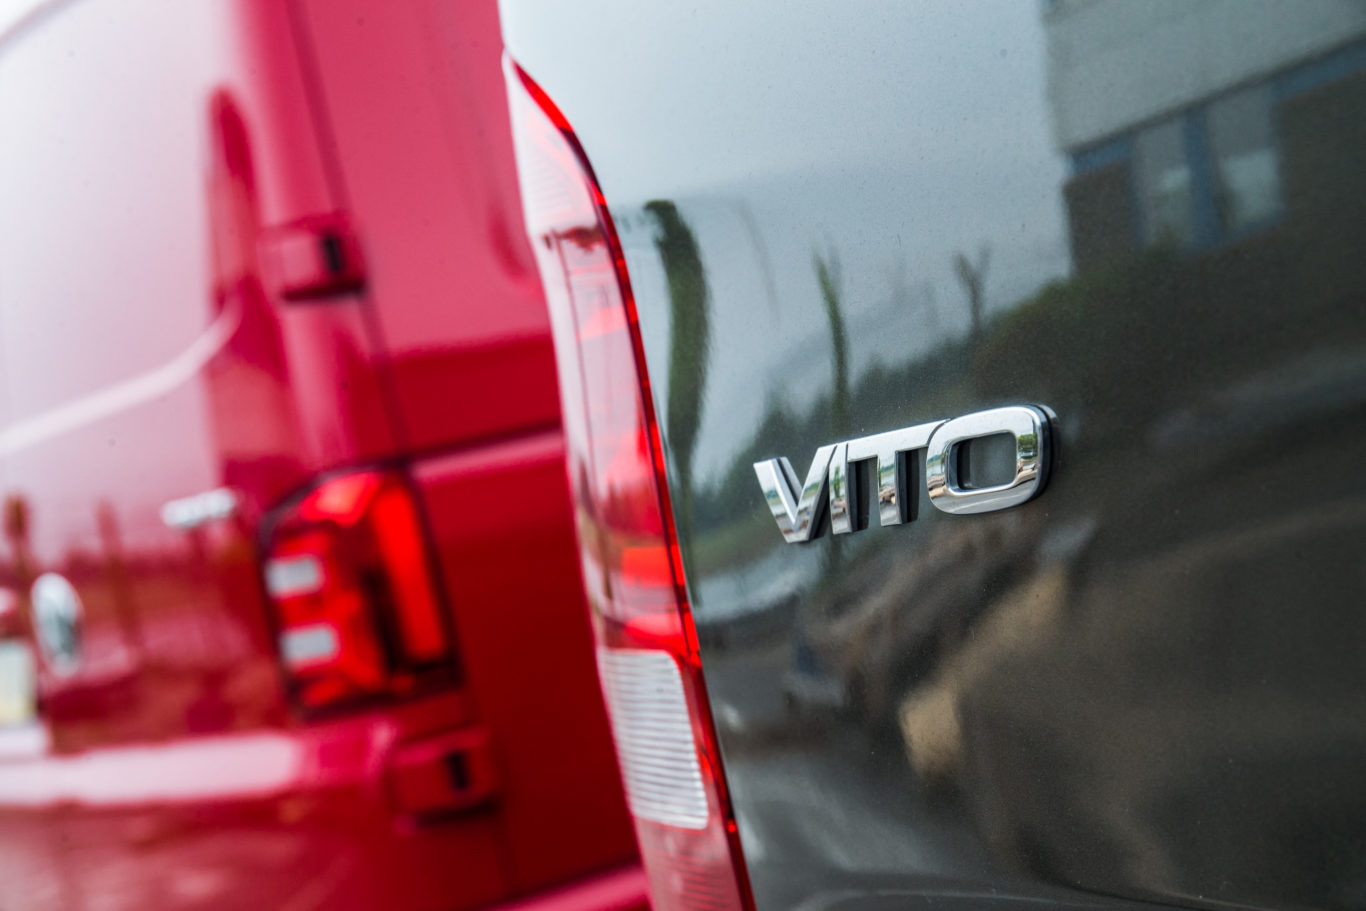 The Vito features the all-important Mercedes badge heritage